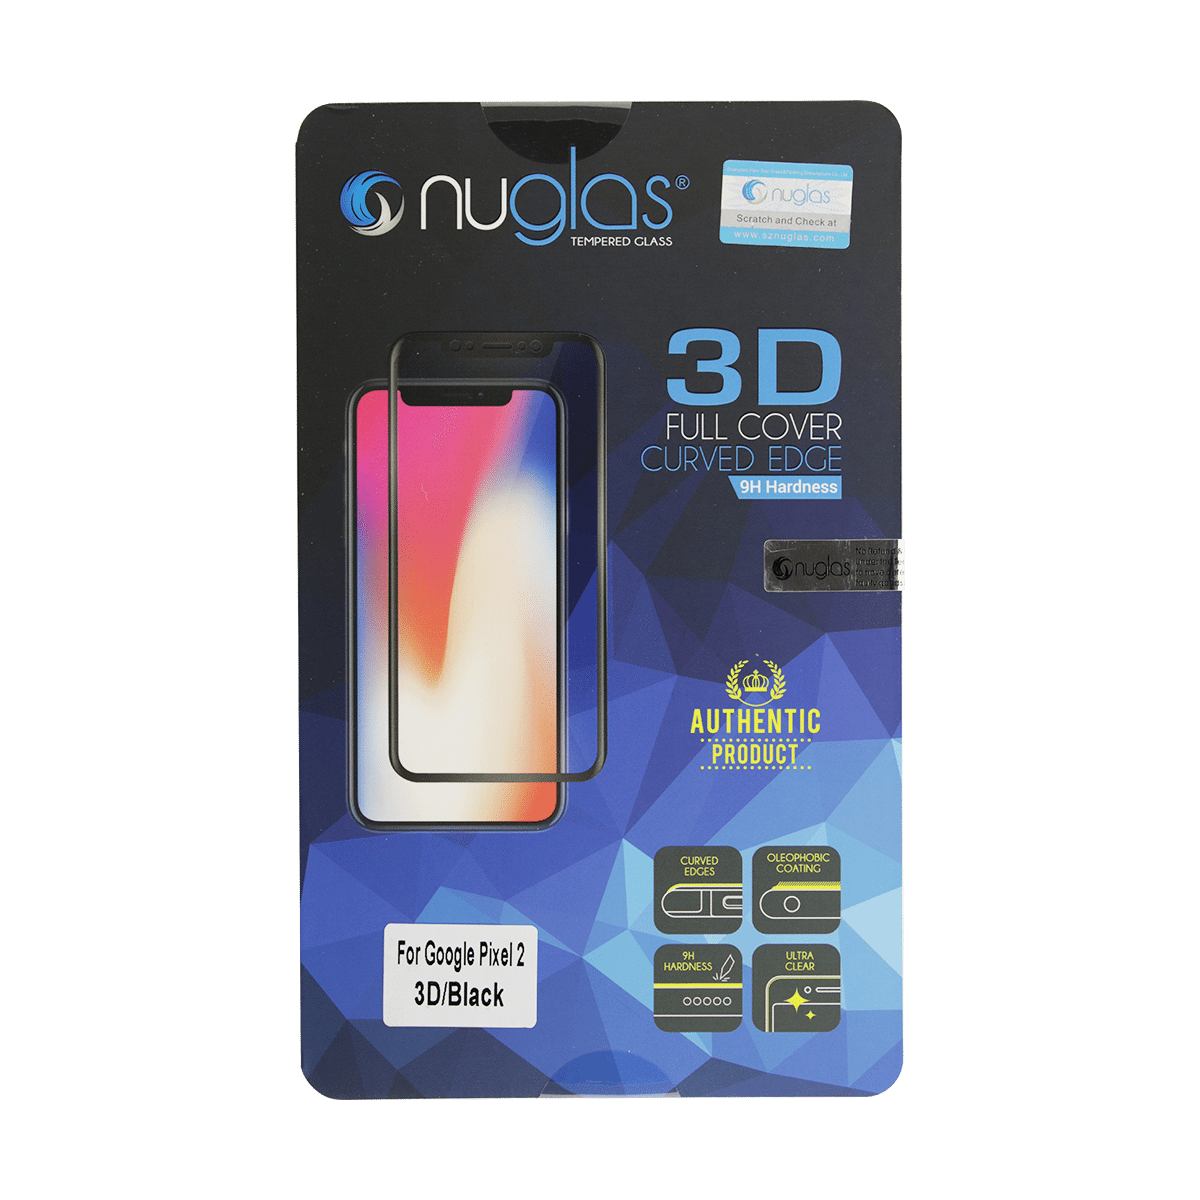 Google Pixel 2 NuGlas Tempered Glass Protection Screen